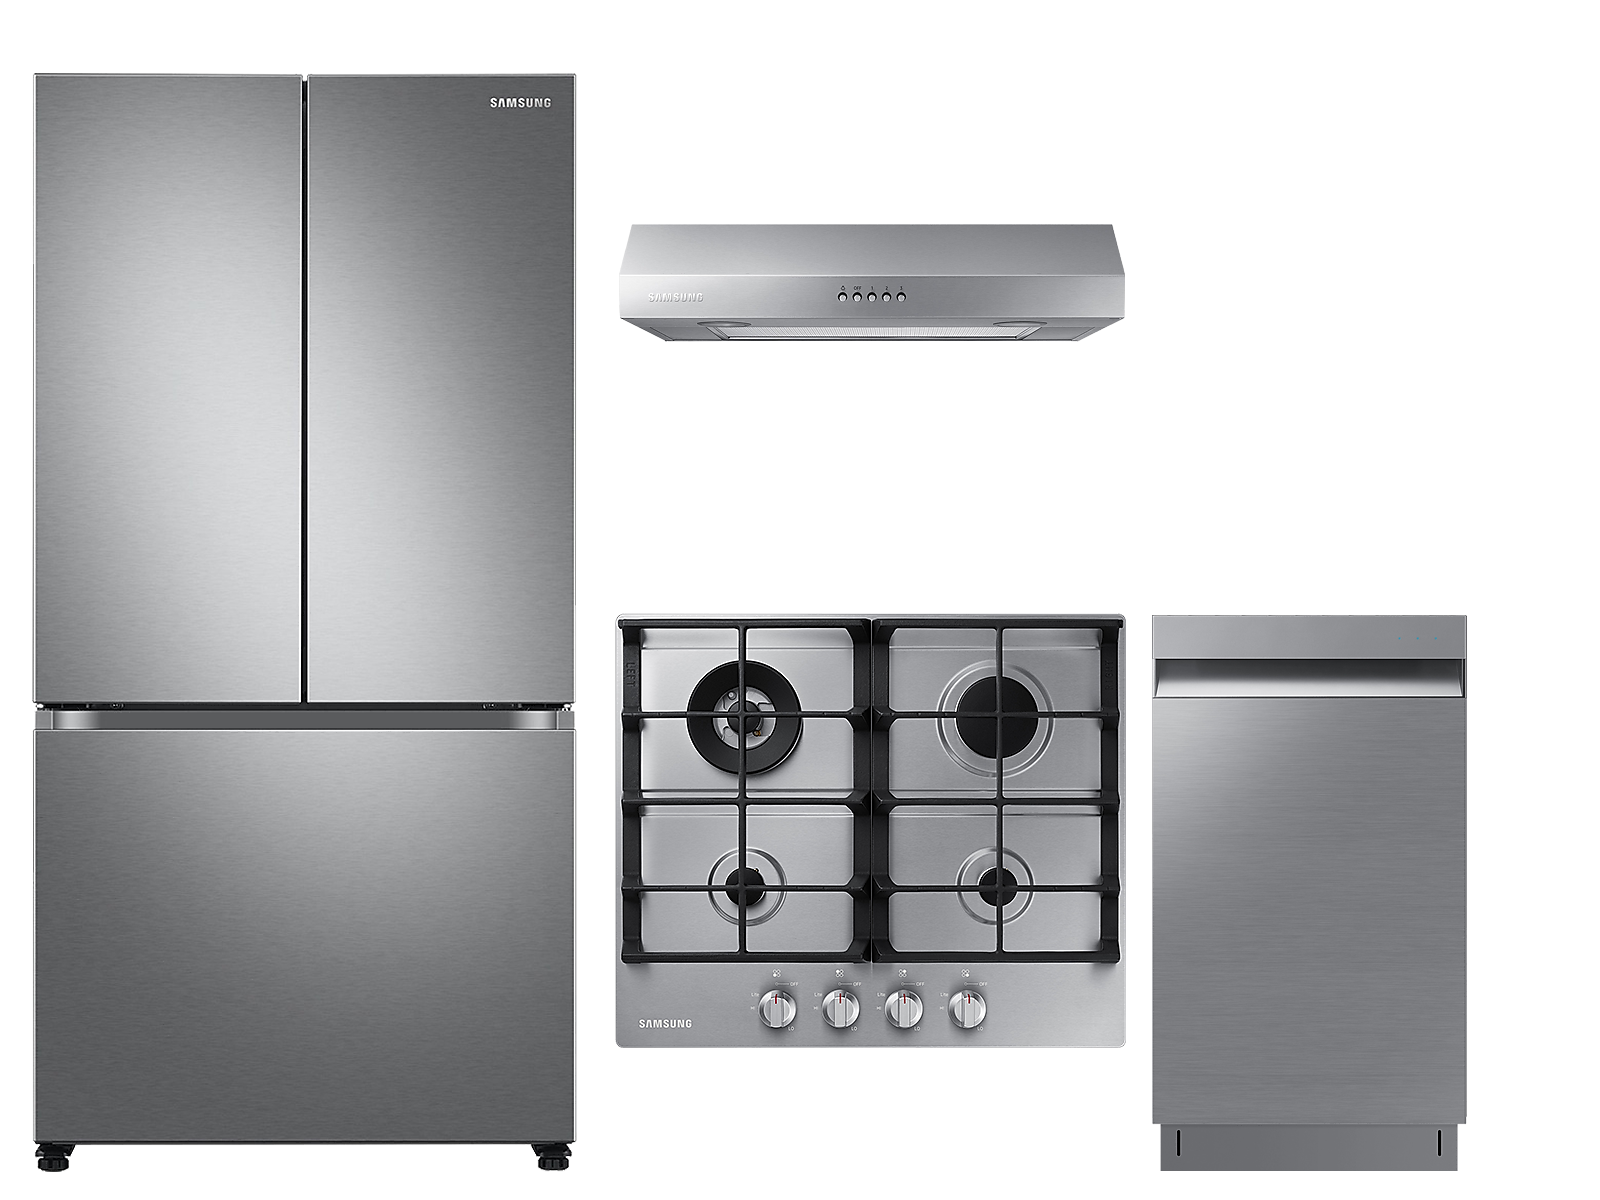 Samsung 3-Door French Door Refrigerator, gas cooktop, range hood and dishwaster small kitchen package in Stainless Steel(BNDL-1620847146272) photo